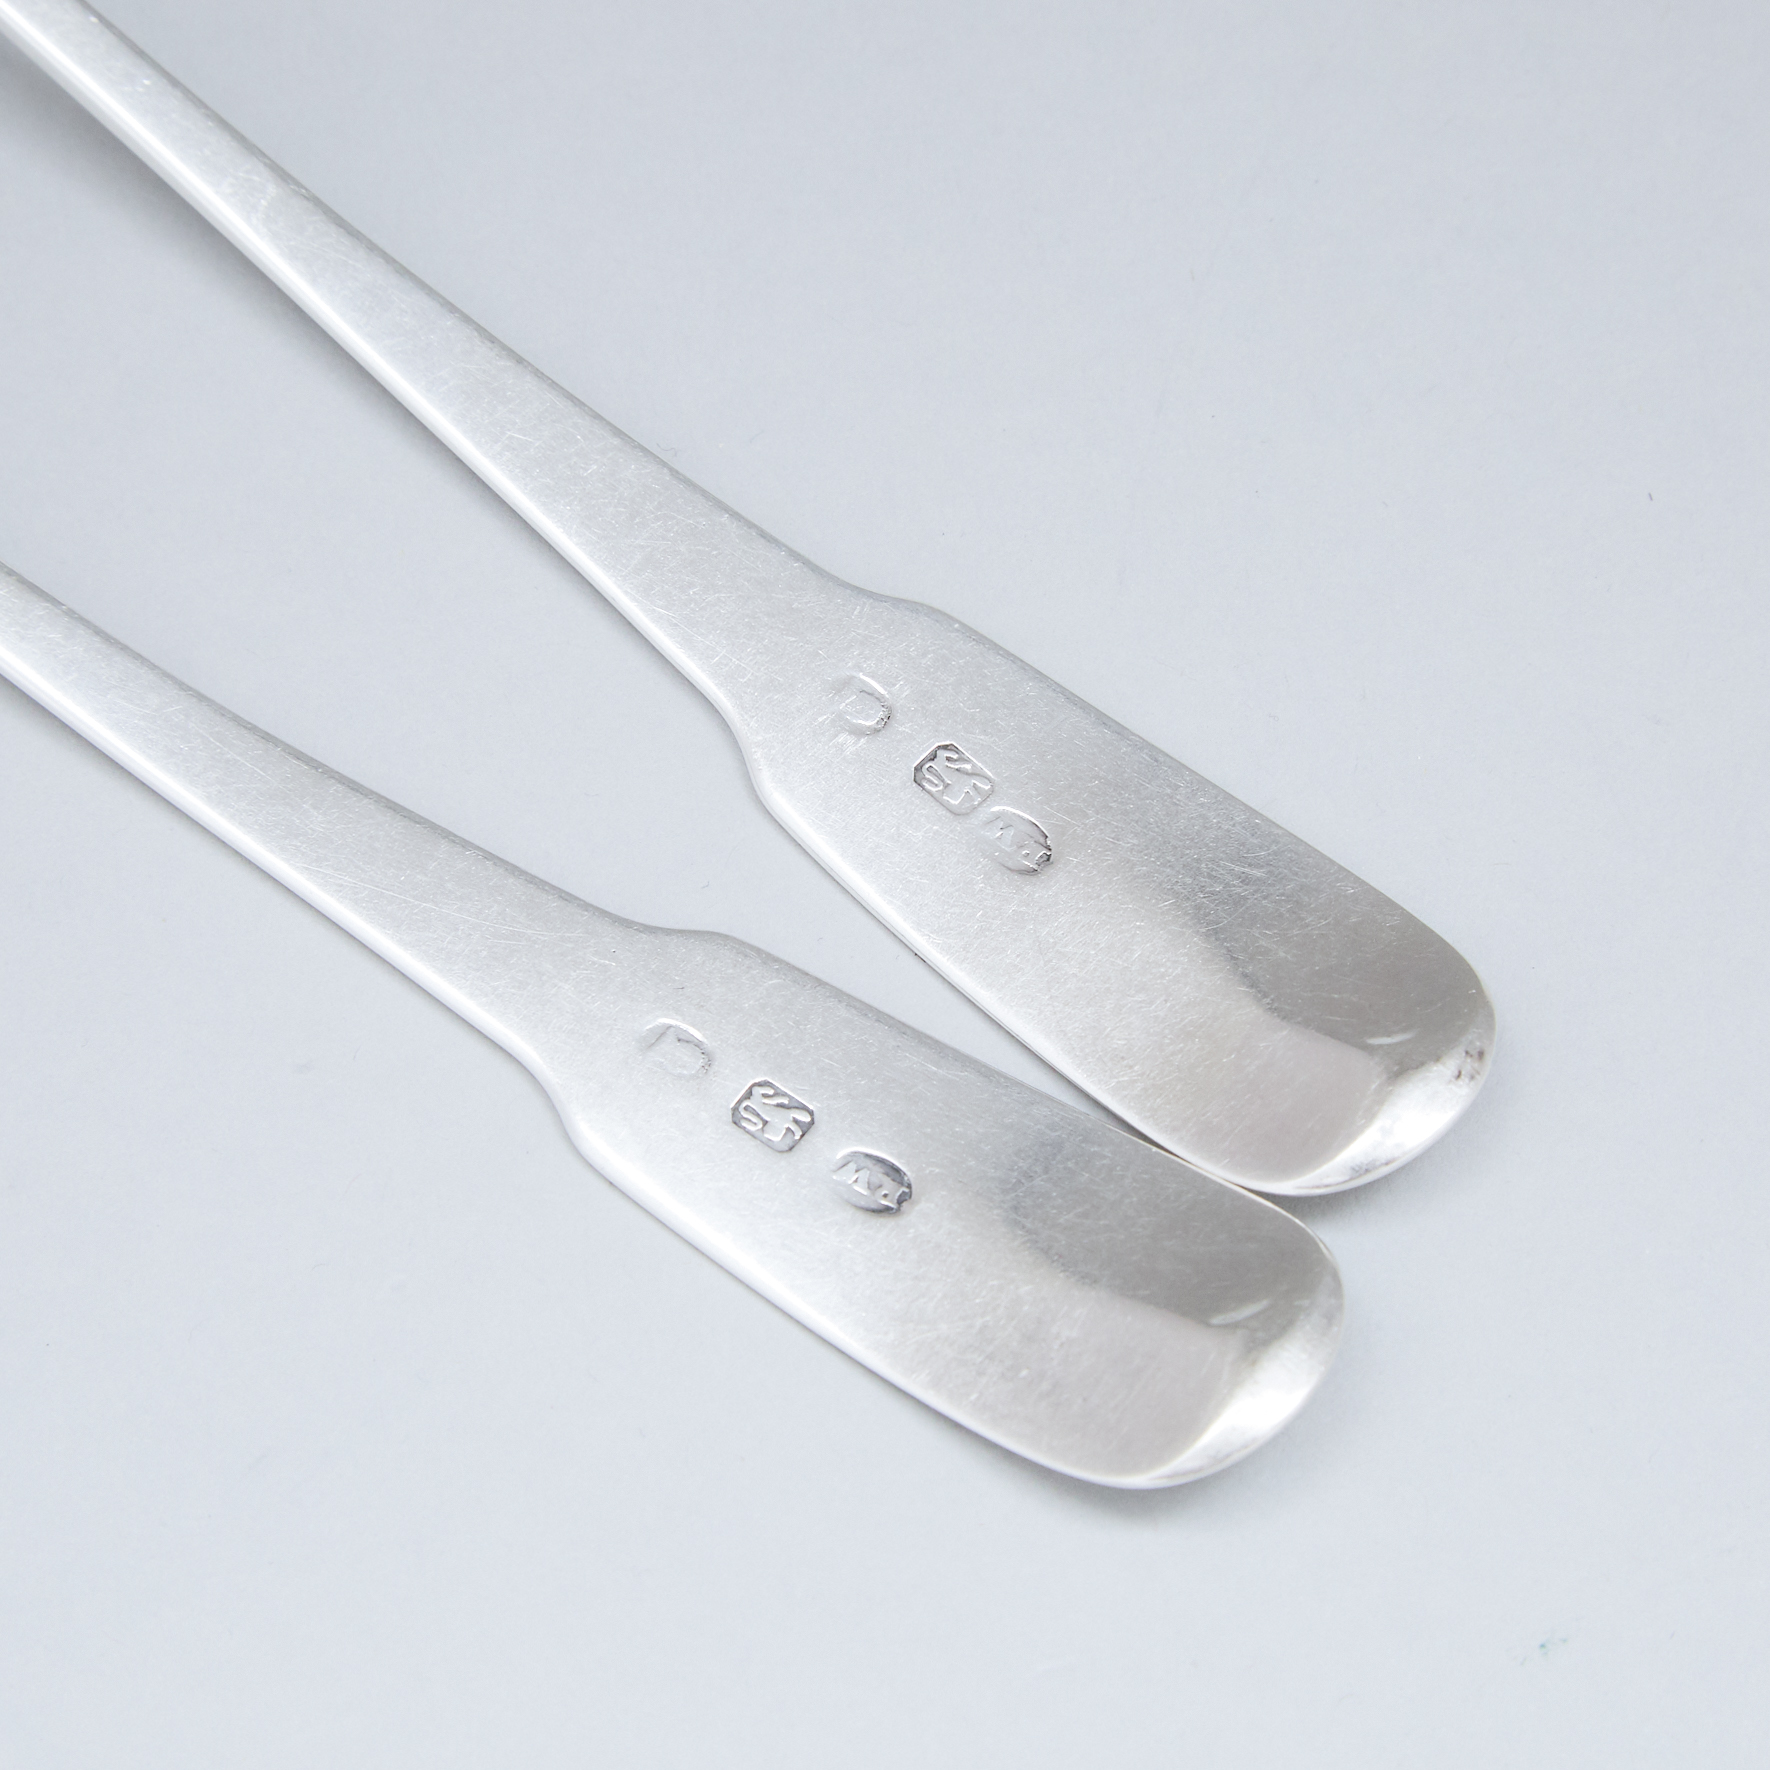 Pair of American Silver Fiddle Pattern Table Spoons, Robert Wilson, Philadelphia, Pa., early 19th century